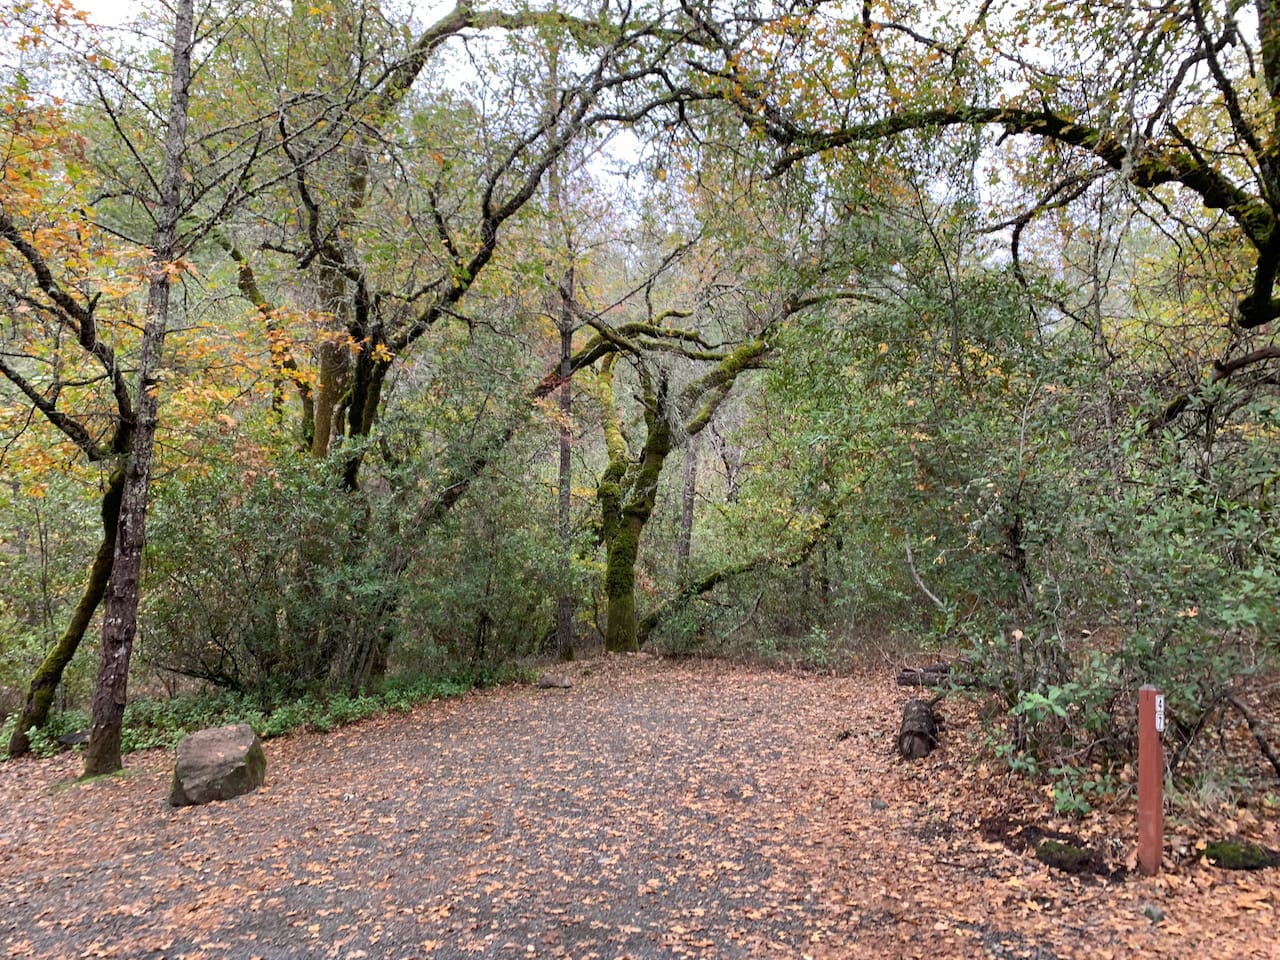 Bothe-Napa Valley State Park 2